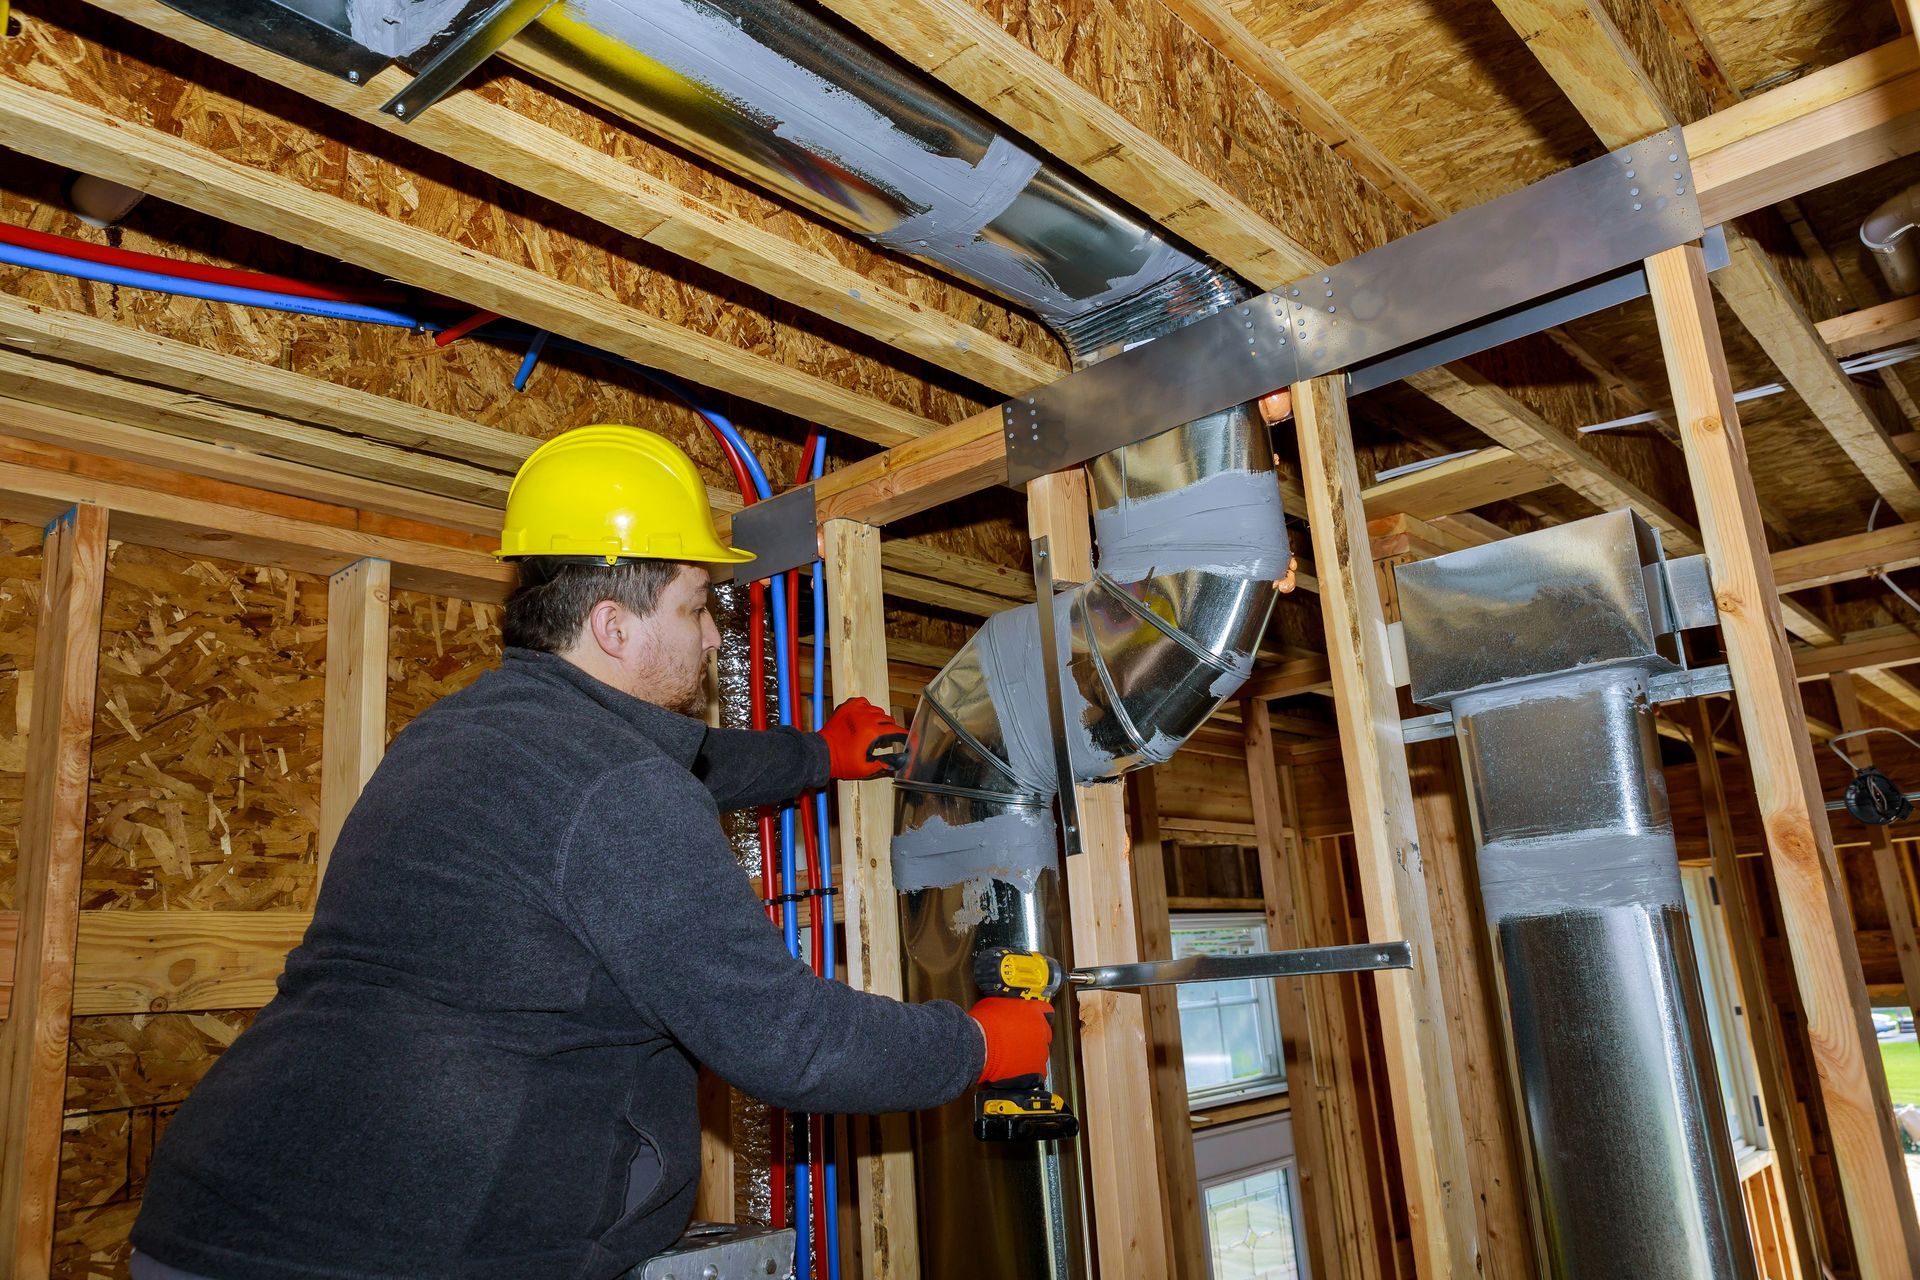 a man wearing a hard hat is working on a pipe in a house under construction .